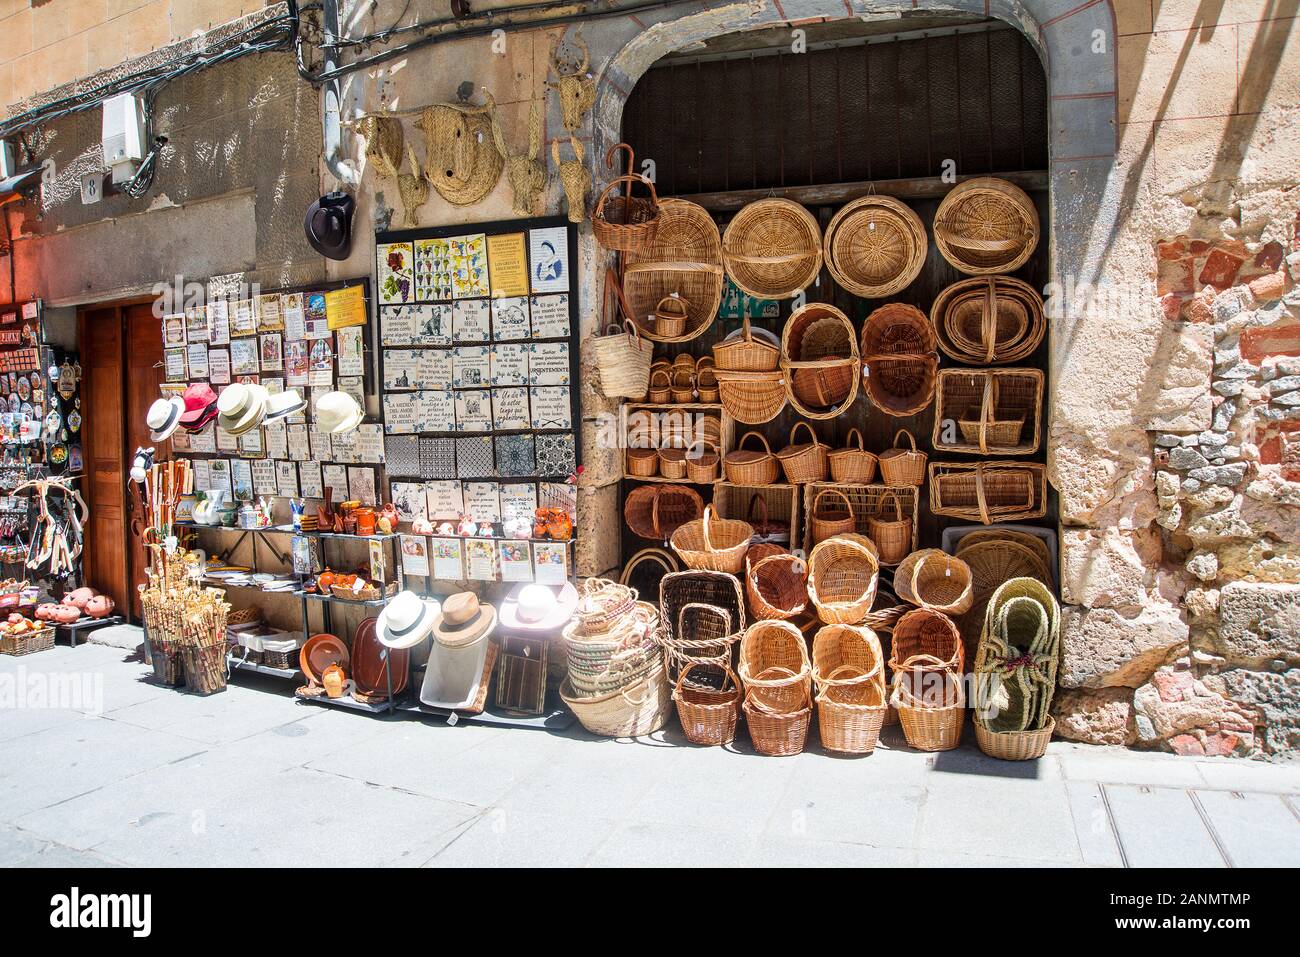 Segovia,Spain-June 10,2017: Wicker basktets,hats and  other articles hang outside a souvenir shop in a Segpvia,street Stock Photo